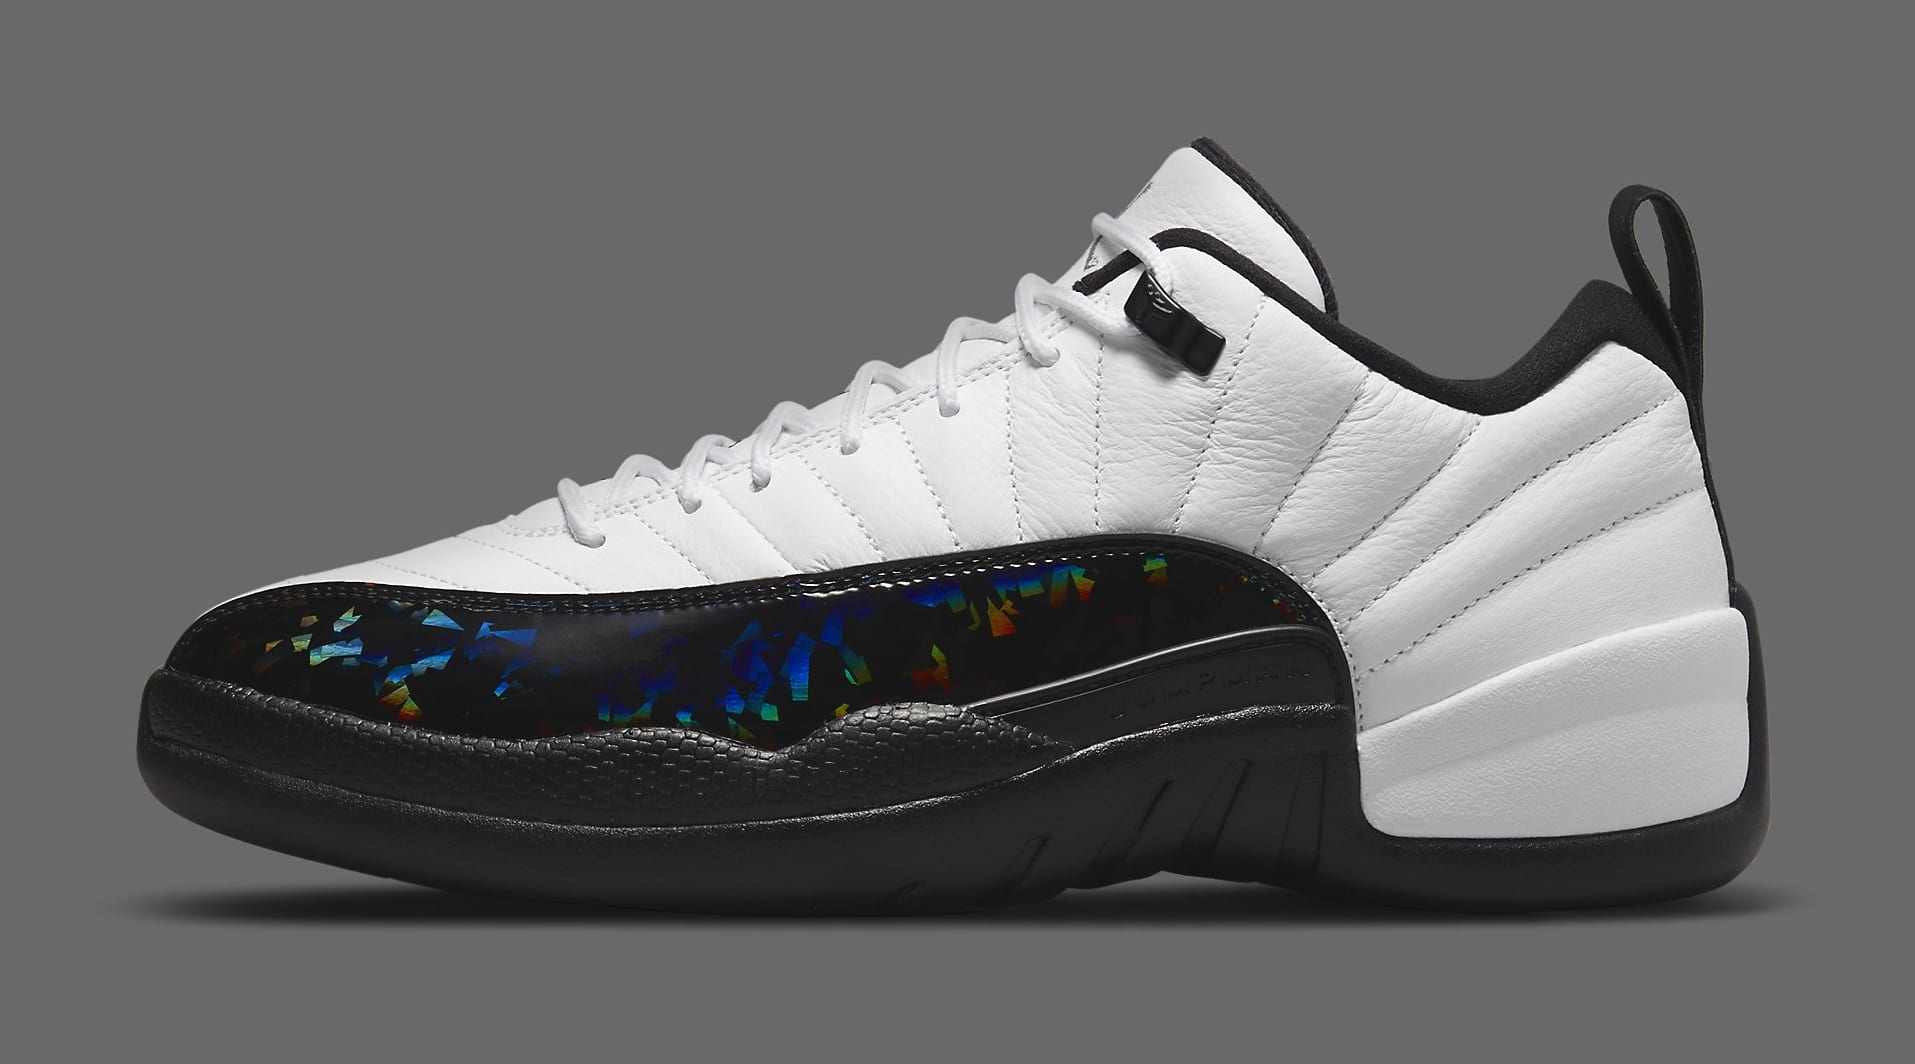 Air Jordan 12 Low 'White and Black' DO8726 100 Lateral